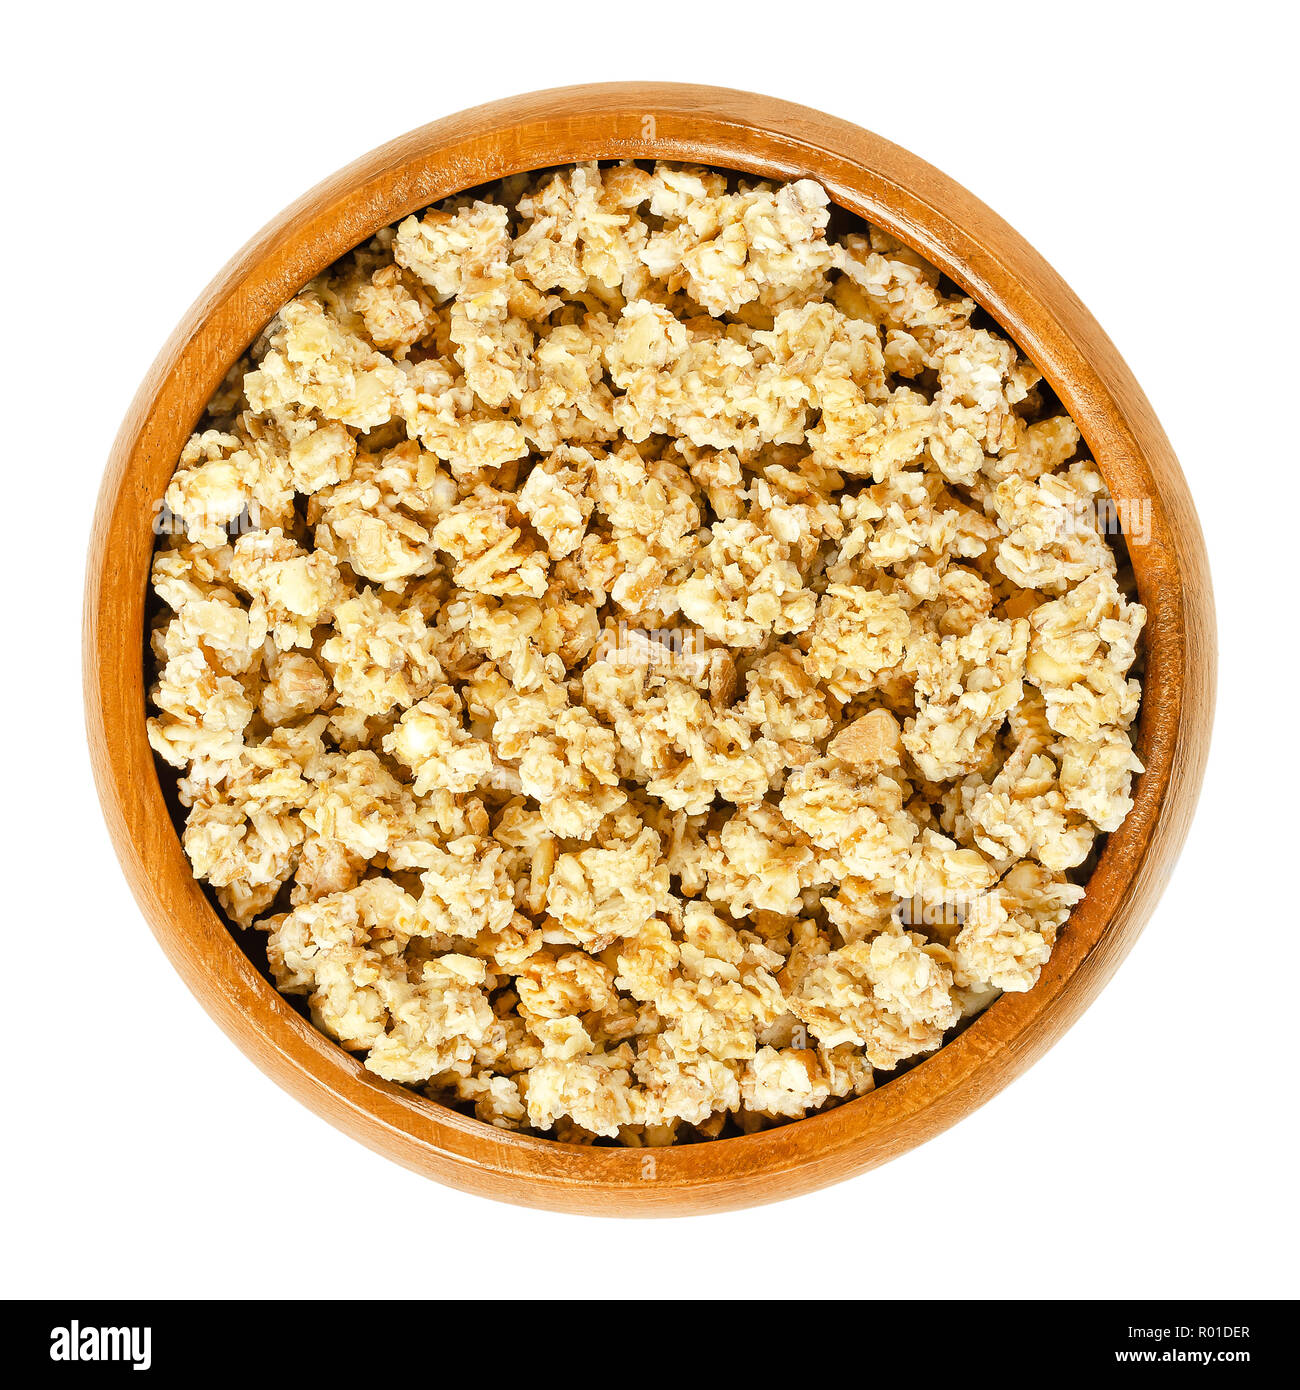 Crunchy granola in wooden bowl. Crispy cereals, made of rolled and toasted whole grain oat flakes and honey. Breakfast and snack food. Stock Photo